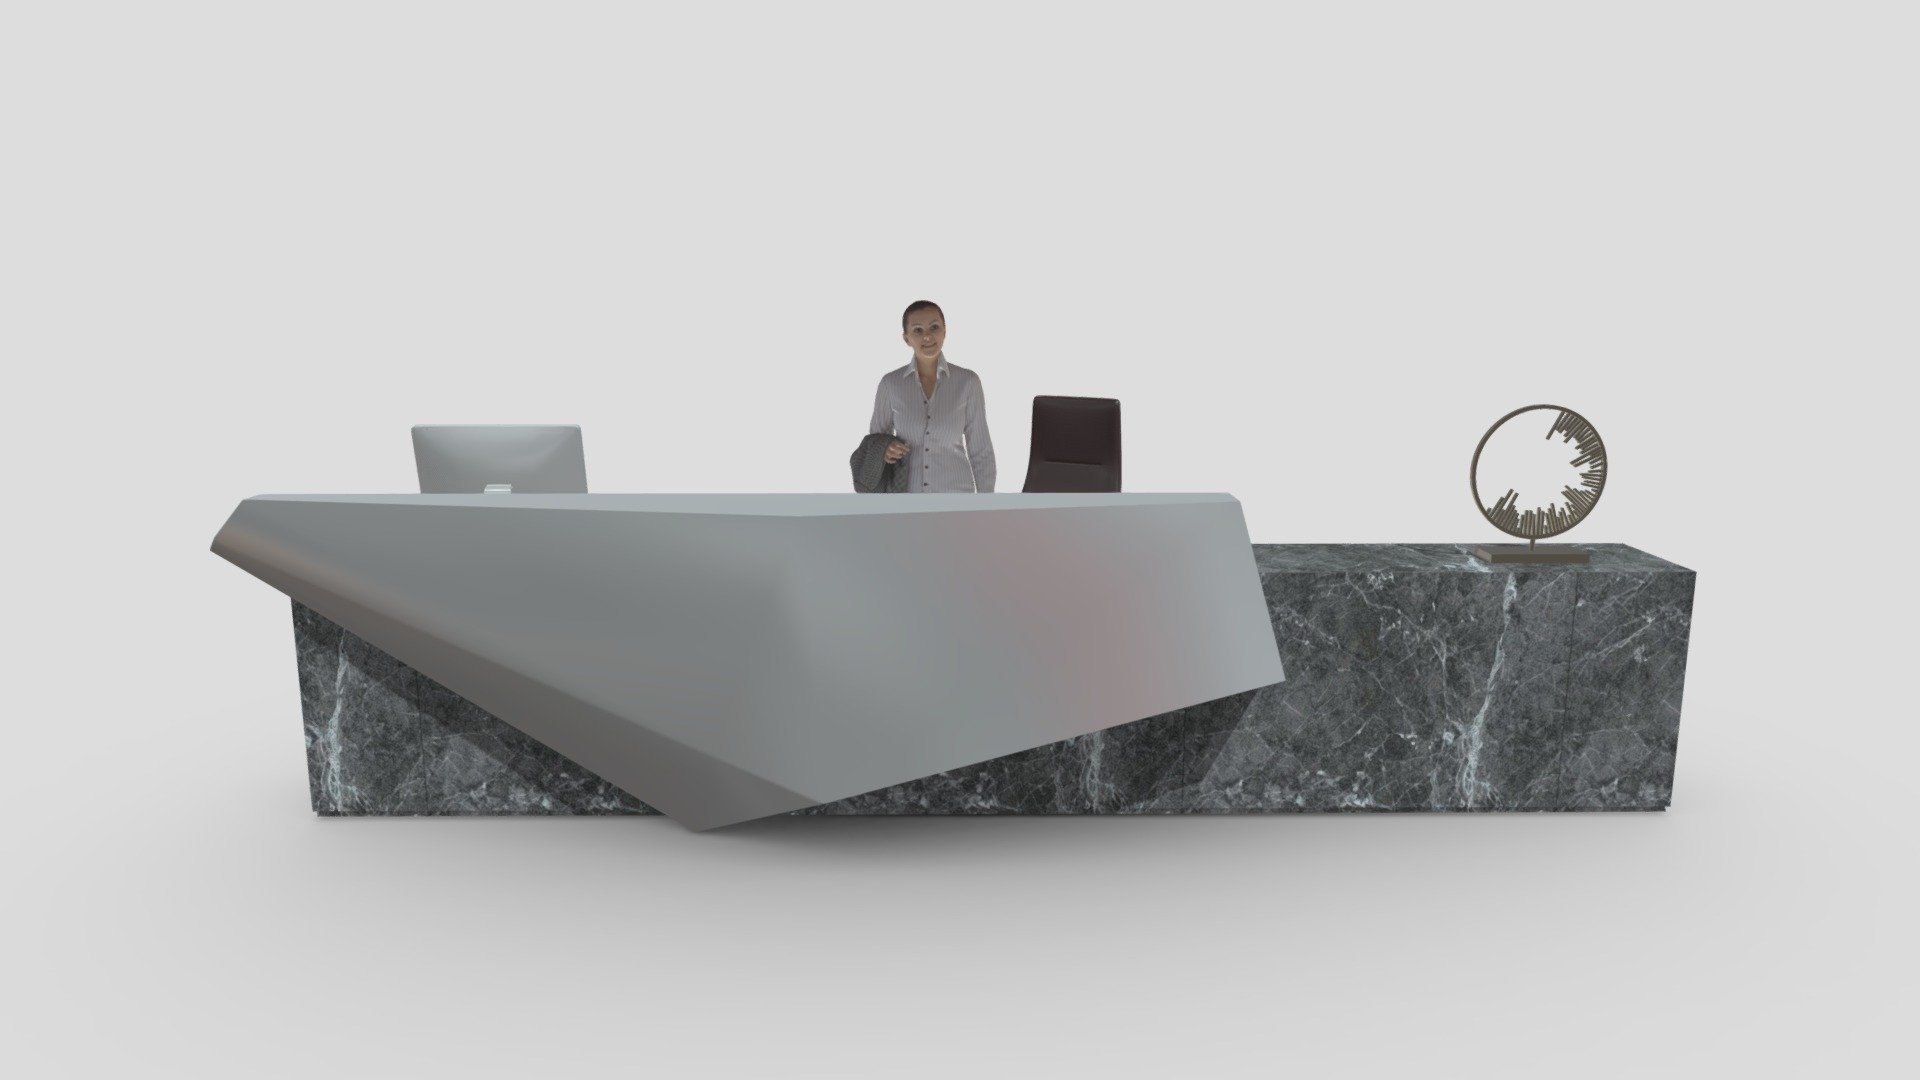 Reception Desk - 053

Native Format File : 3Ds Max 2020 &ndash; Rendering by Vray Next

File save as : 3Ds Max 2017 with converted all object to Editable Poly.

Exporting Formats :
Autodesk FBX ( .fbx ) and OBJ ( .obj &amp; .mtl ).

All 5 Texture maps are include as JPG.

Support 24/7 3d model